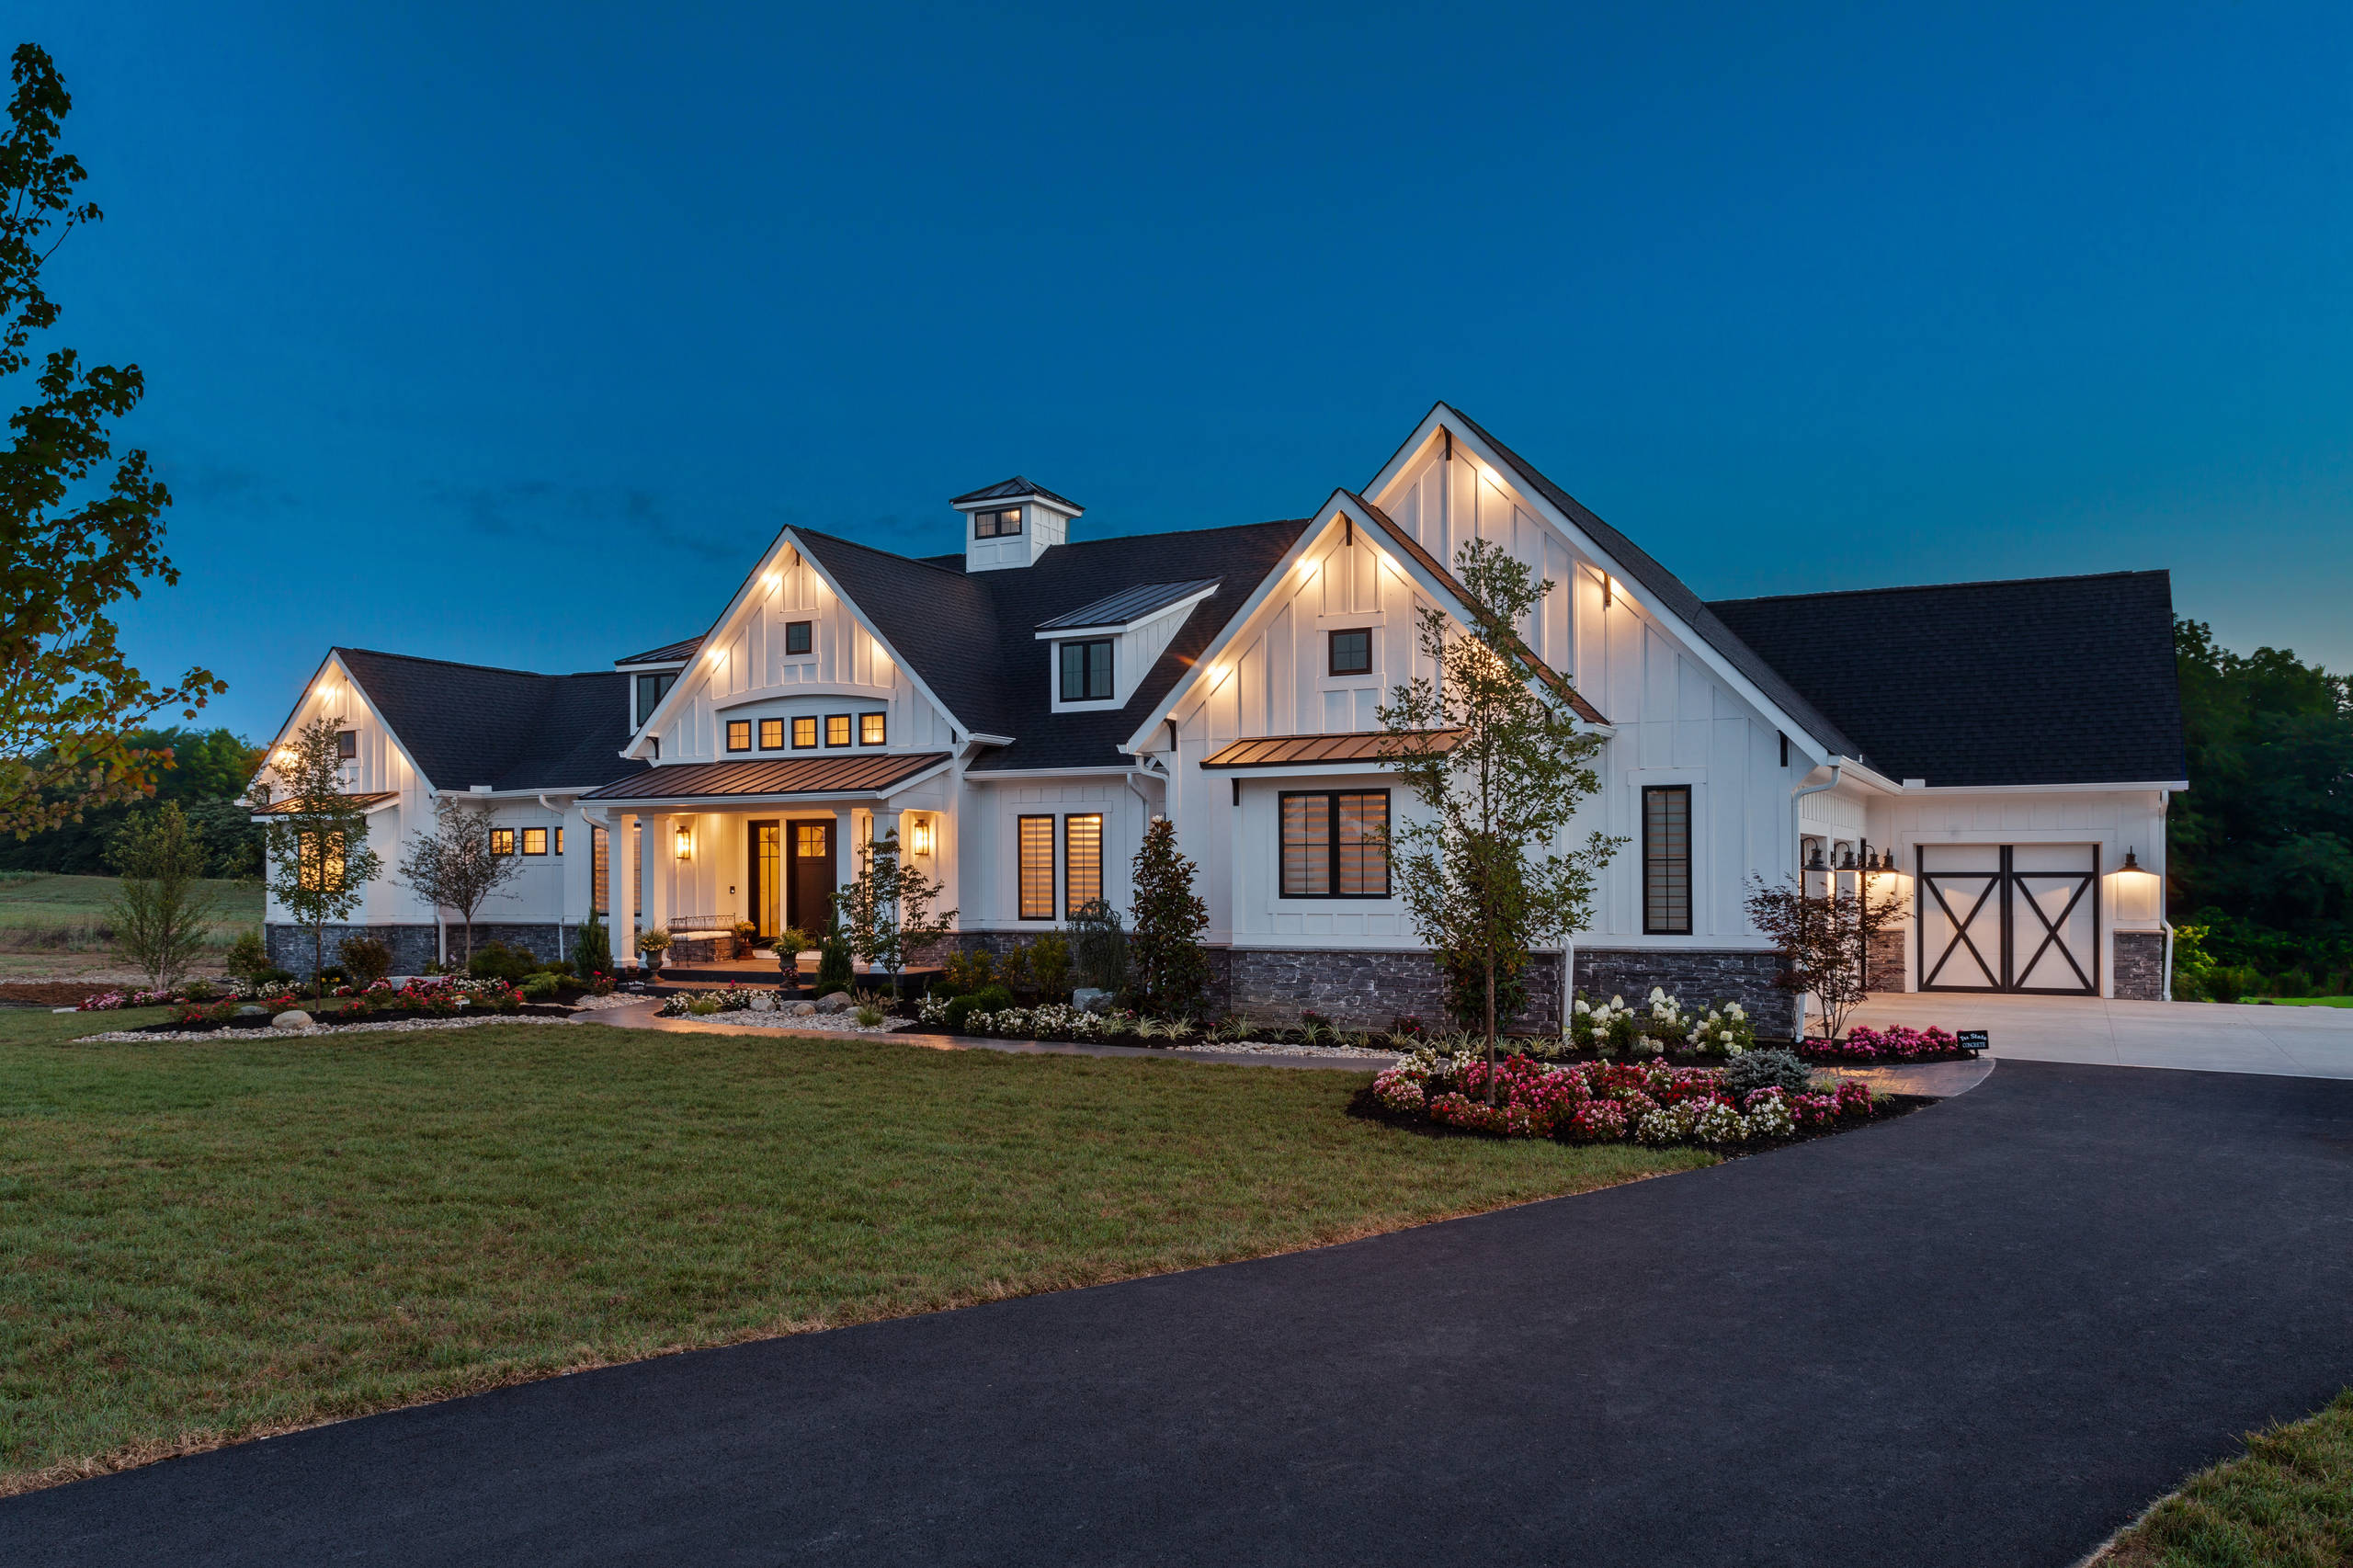 75 Beautiful One Story Exterior Home Pictures Ideas March 2021 Houzz Mark voelkel of rolling acres landscape worked closely with the homeowners, architects and builders to come up with a functional. 75 beautiful one story exterior home